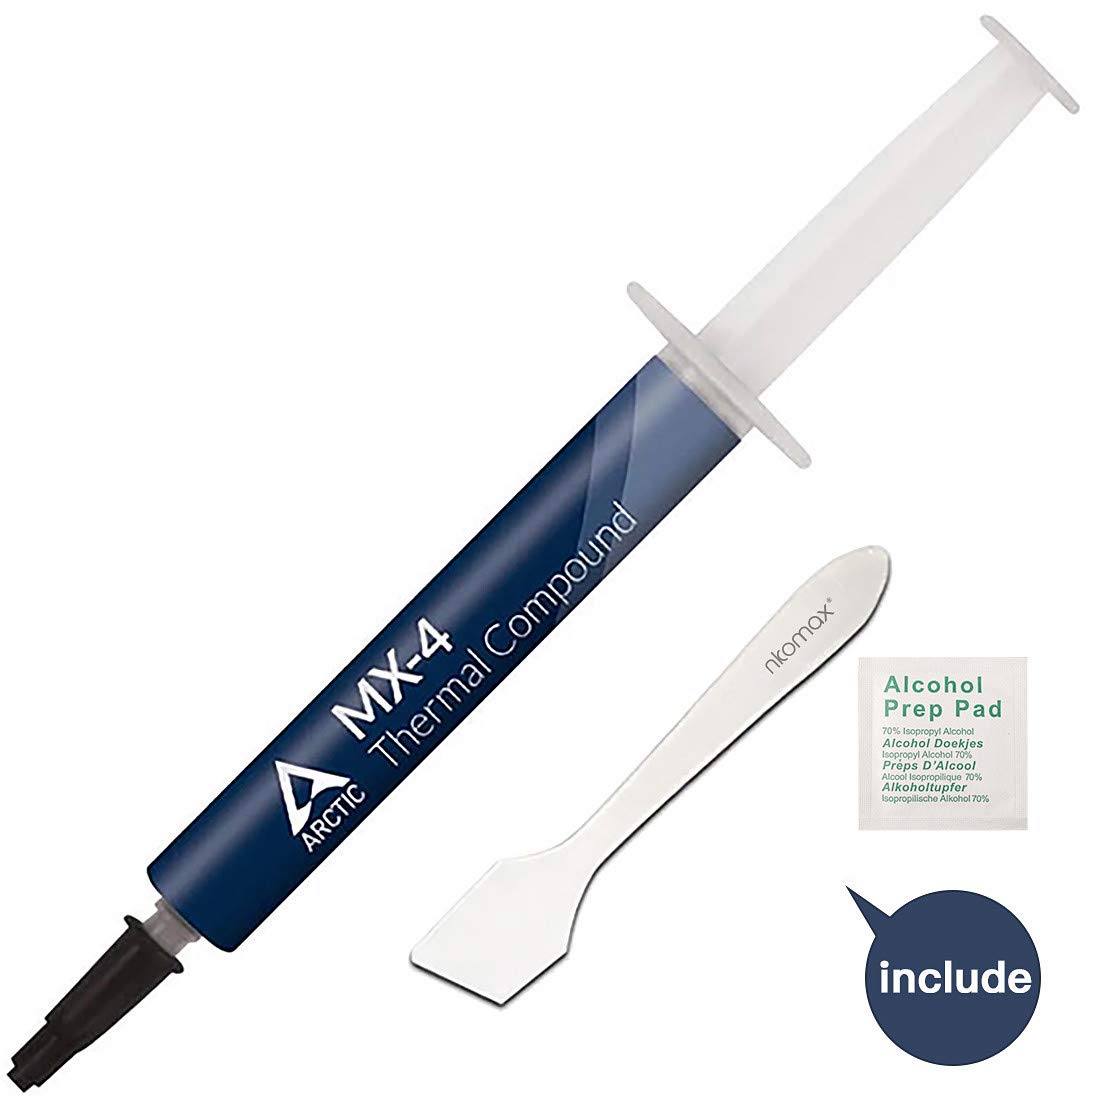 ARCTIC MX-4 - Thermal Compound Paste For Coolers | Heat Sink Paste | Composed of Carbon Micro-particles | Easy to Apply | High Durability - 4 Grams 